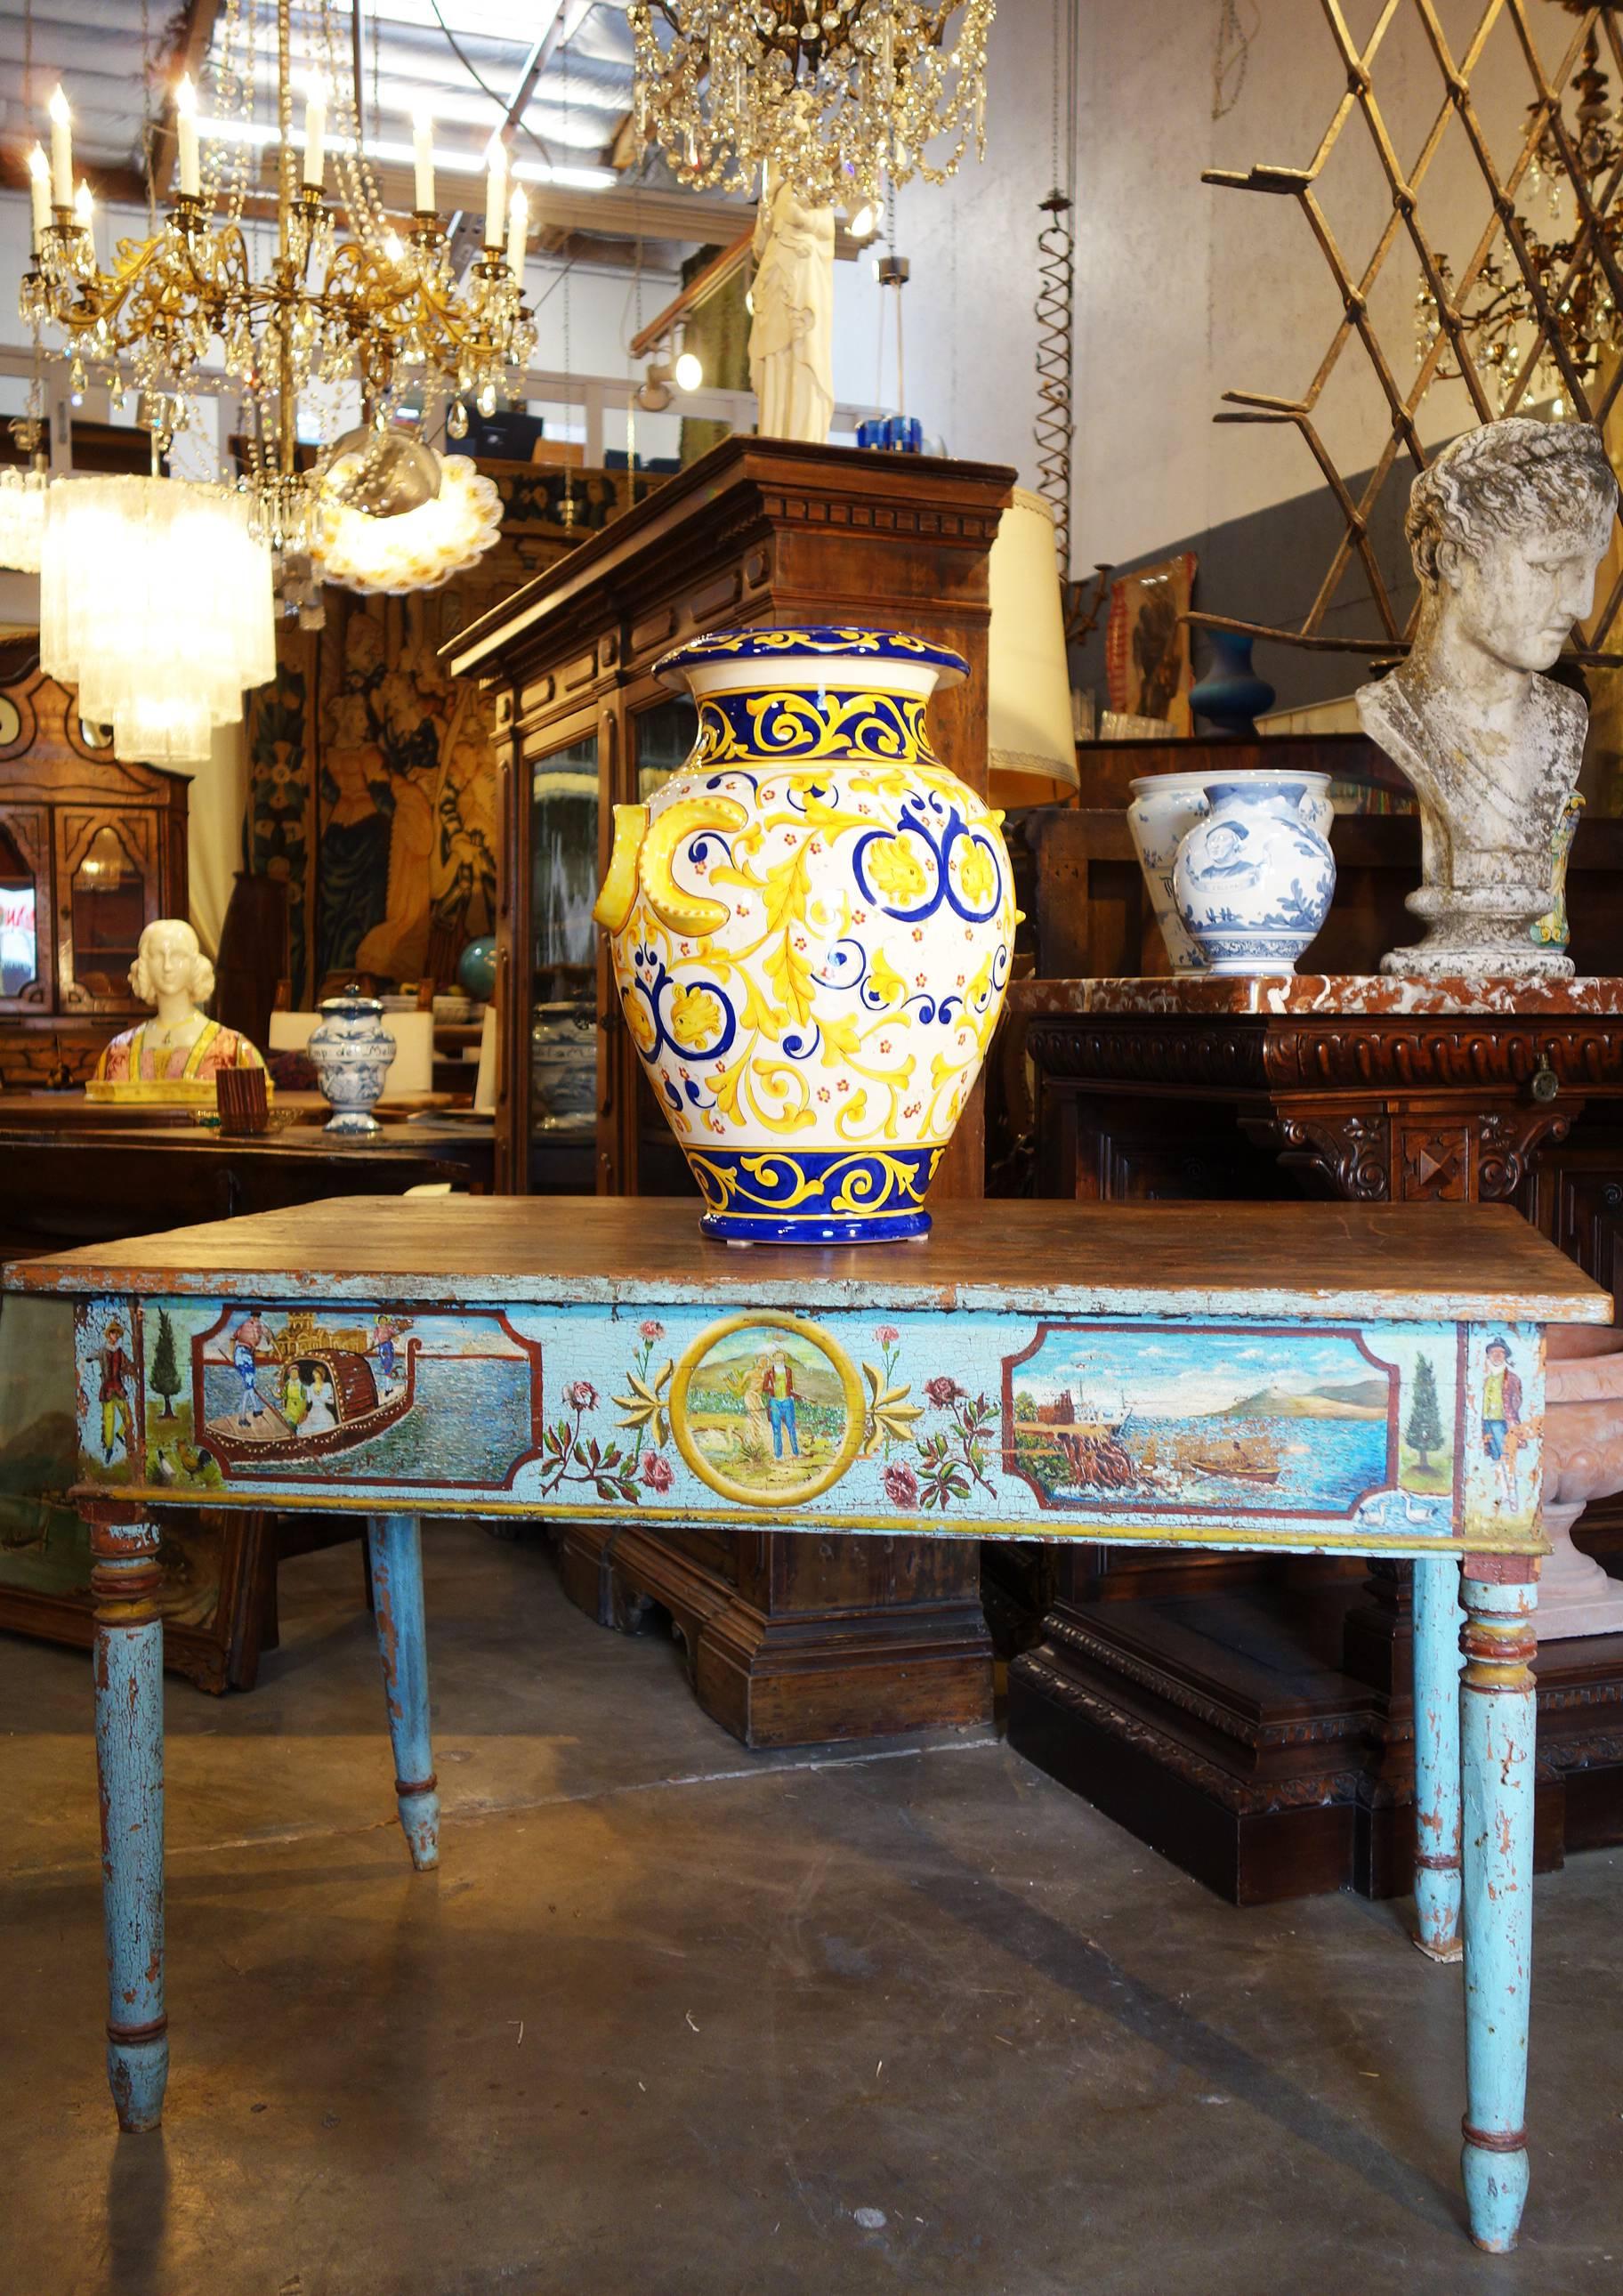 Lovely reproduction of Classic Renaissance Revival theme, expertly handcrafted and hand-painted Majolica glaze over terra cotta. 
Mediterranean blue & golden yellow color theme. Made in Italy.
Limited edition, exclusively produced for Bellini's